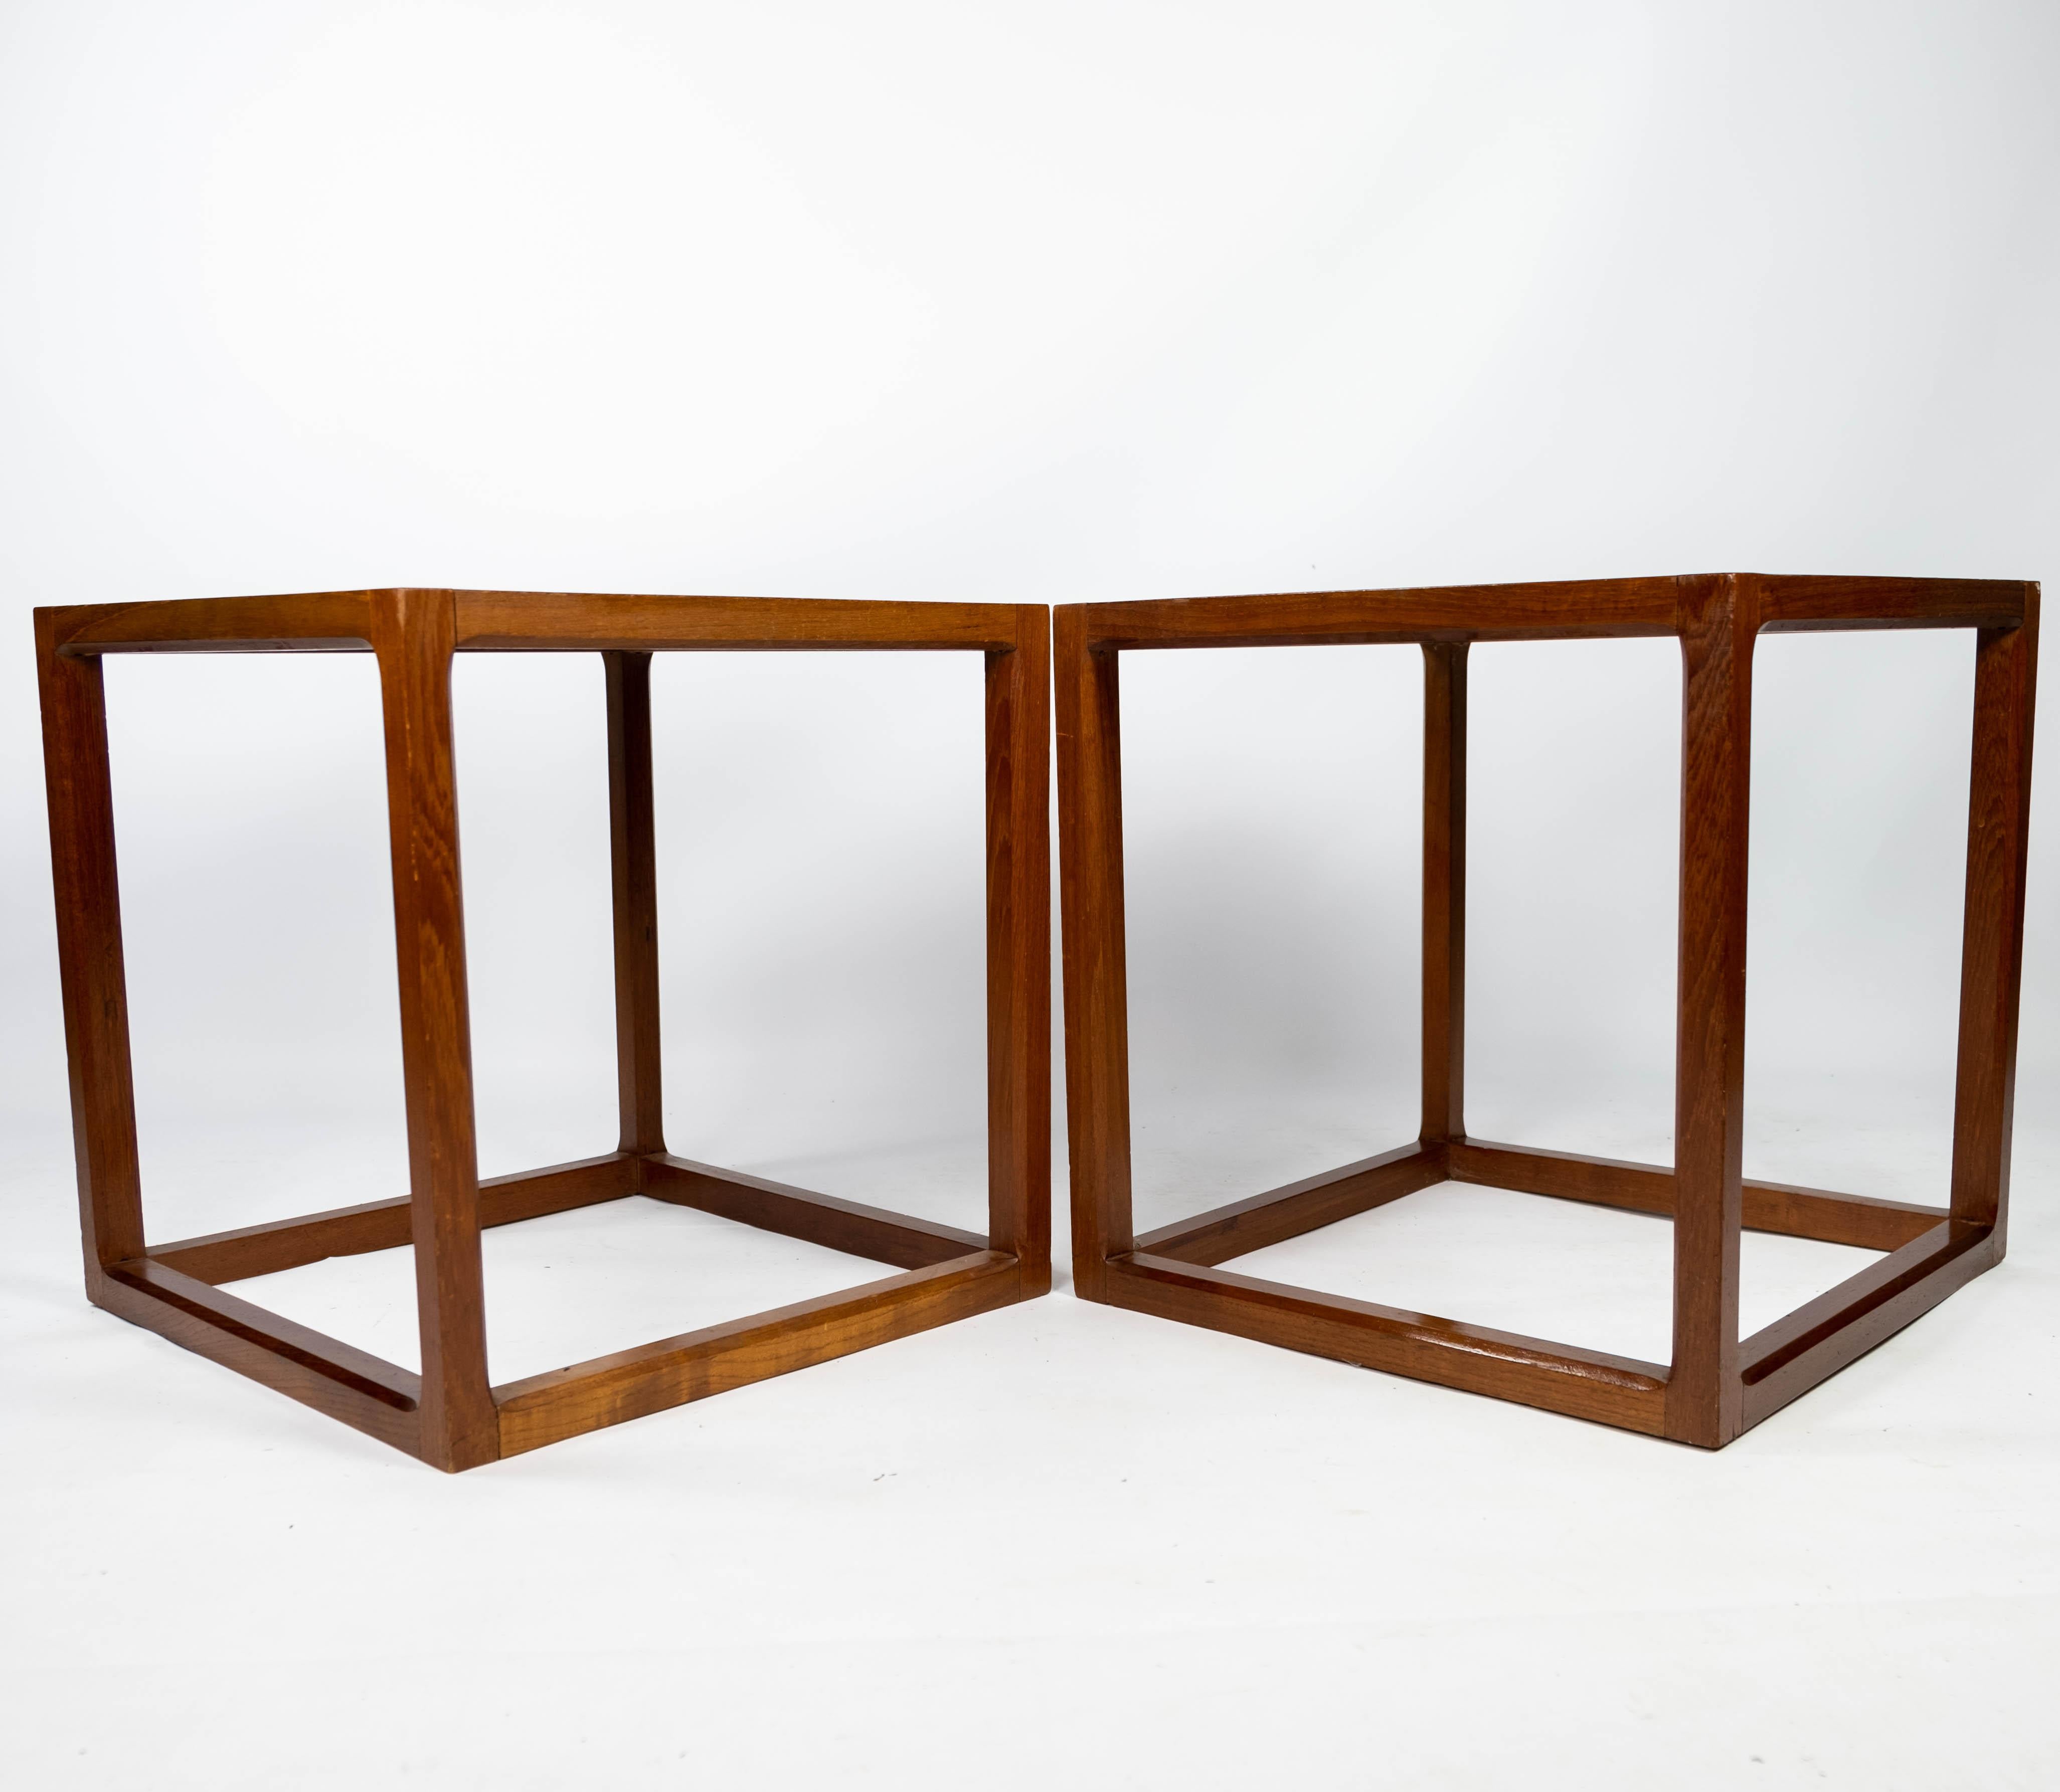 Set of two side tables in teak designed by Johannes Andersen and manufactured by Silkebord Furniture from the 1960s. The tables are in great vintage condition.